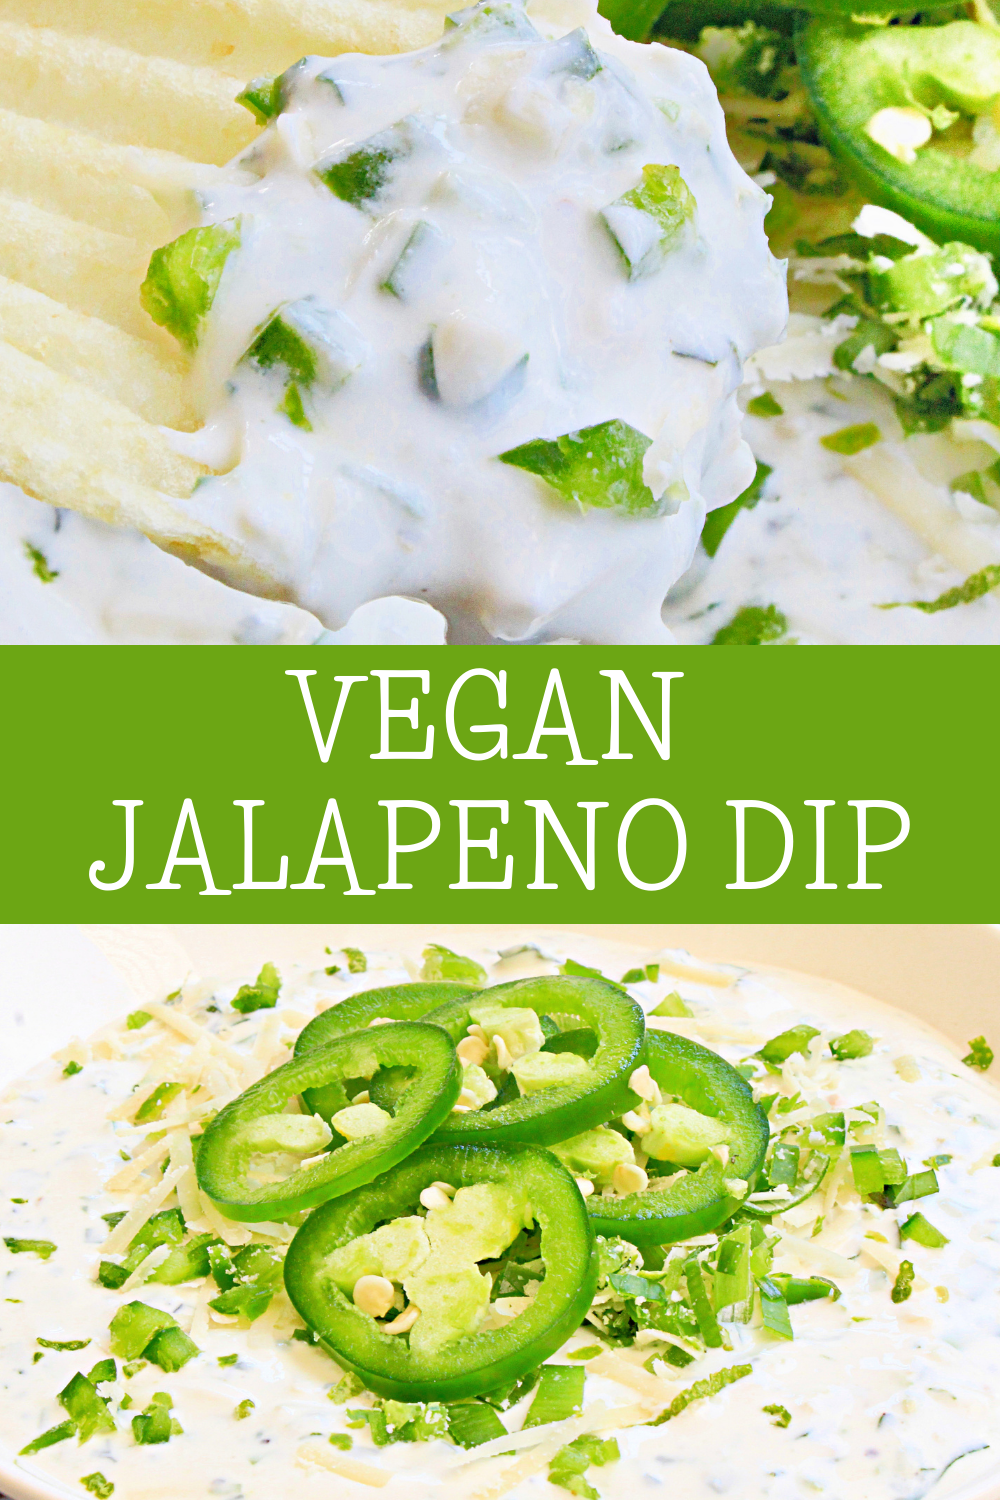 Jalapeno Dip ~ This creamy, no-bake, dairy-free jalapeno dip is easy to make and packed with fresh flavors! Ready to serve in minutes! via @thiswifecooks